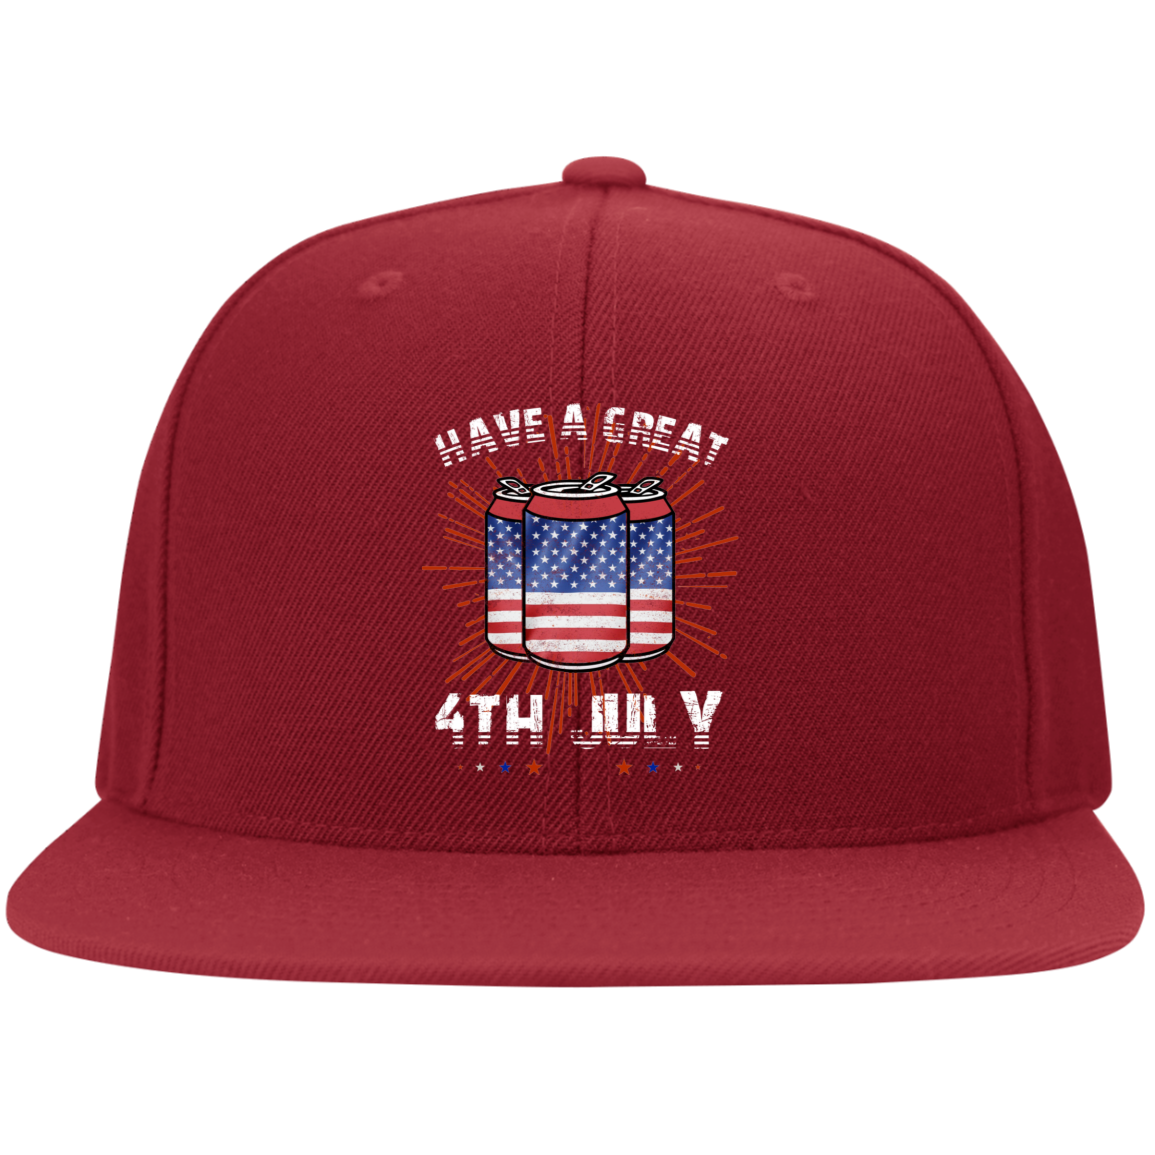 HAVE A GREAT 4TH CAN Embroidered Flat Bill Twill Flexfit Cap